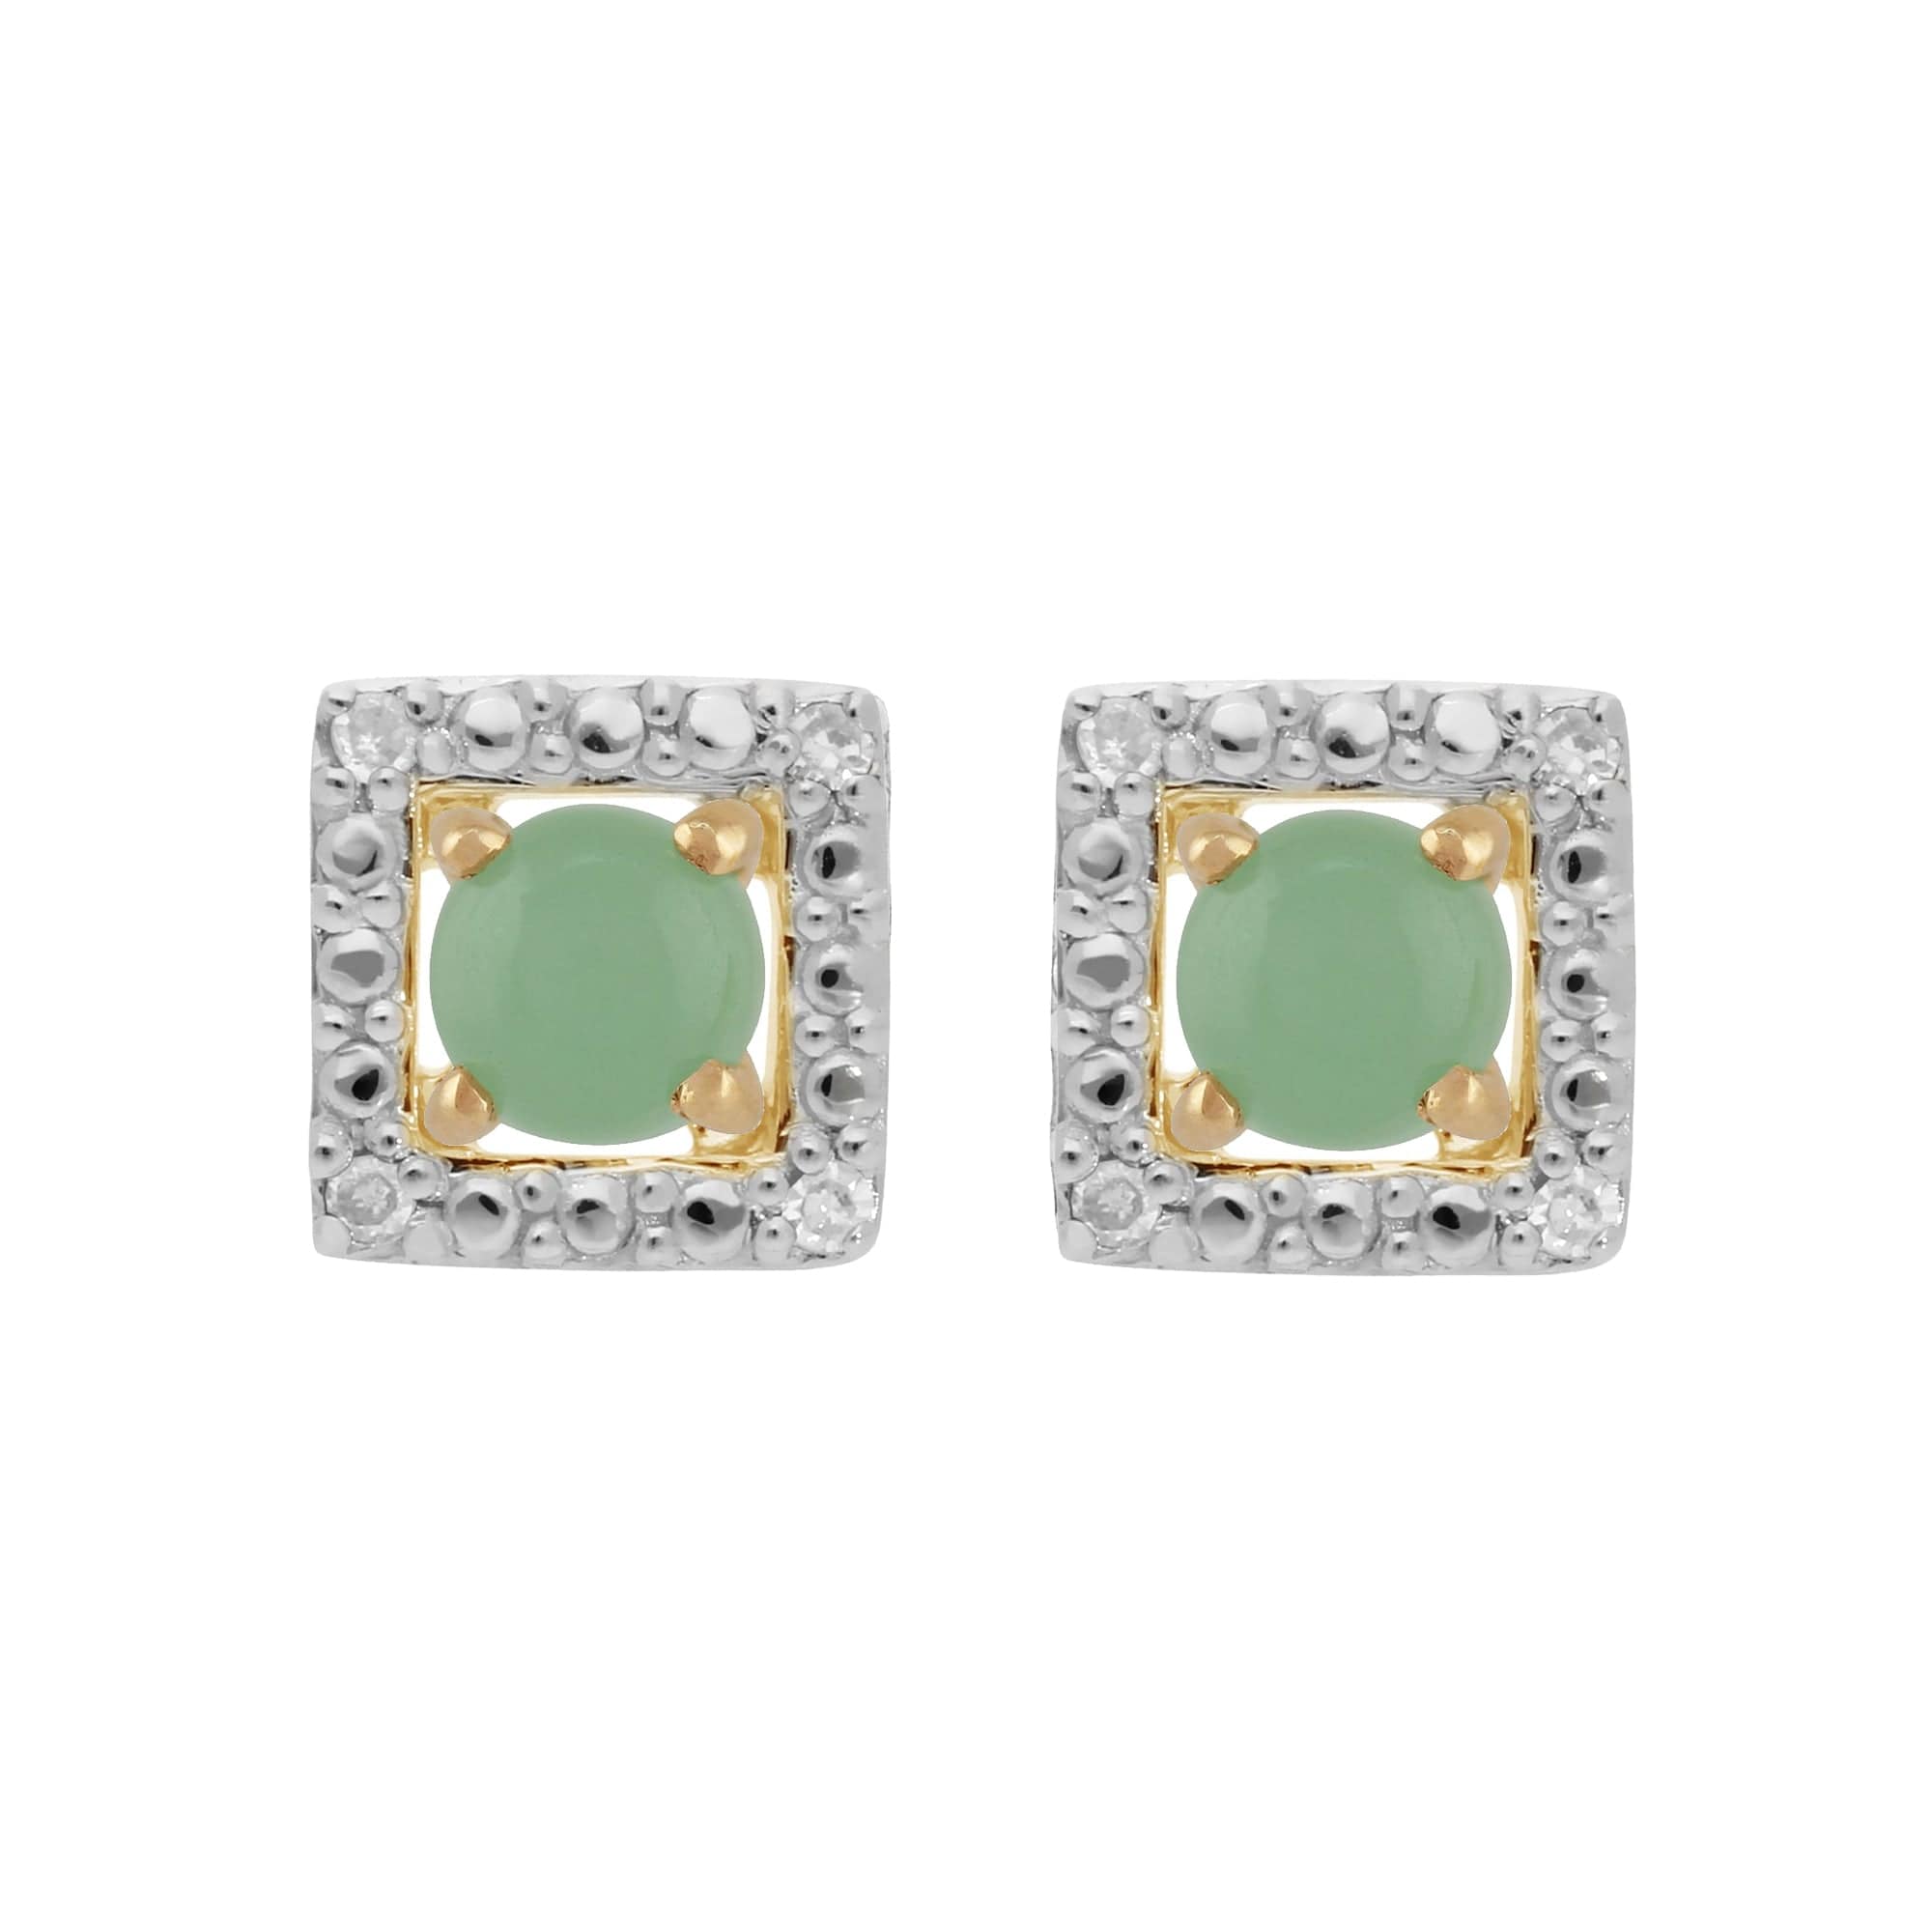 26943-191E0379019 Classic Round Jade Stud Earrings with Detachable Diamond Square Earrings Jacket Set in 9ct Yellow Gold 1